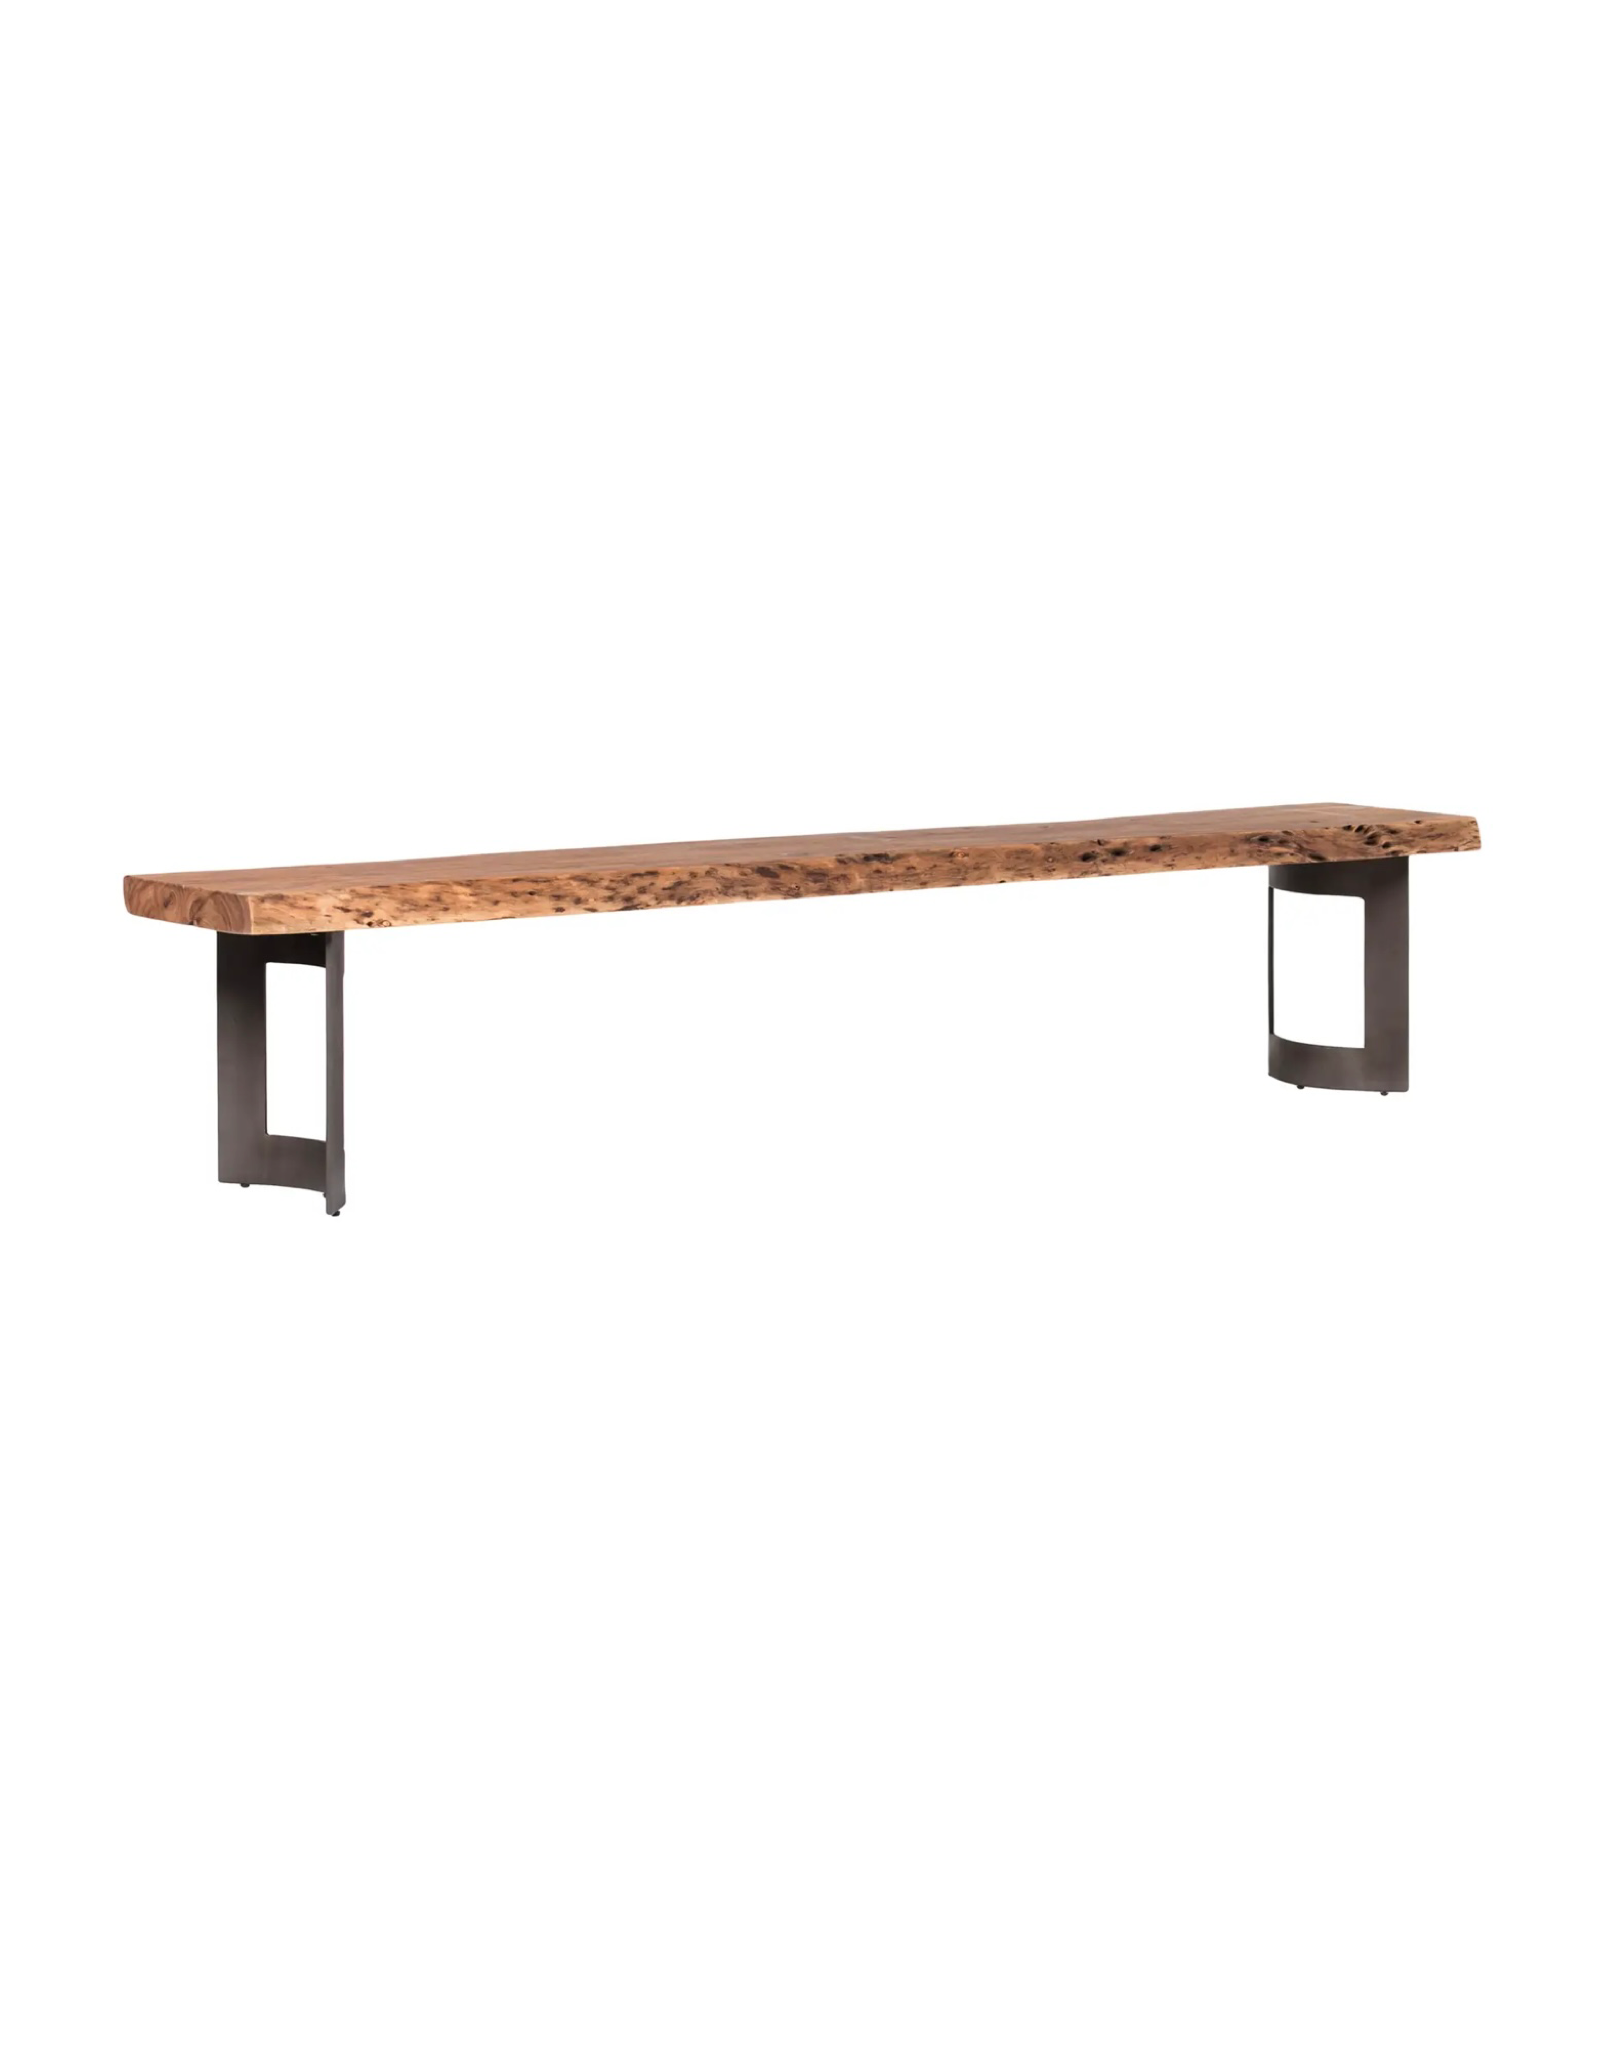 Moes Home Collection Moes Bent Bench Small Smoked VE-1002-03